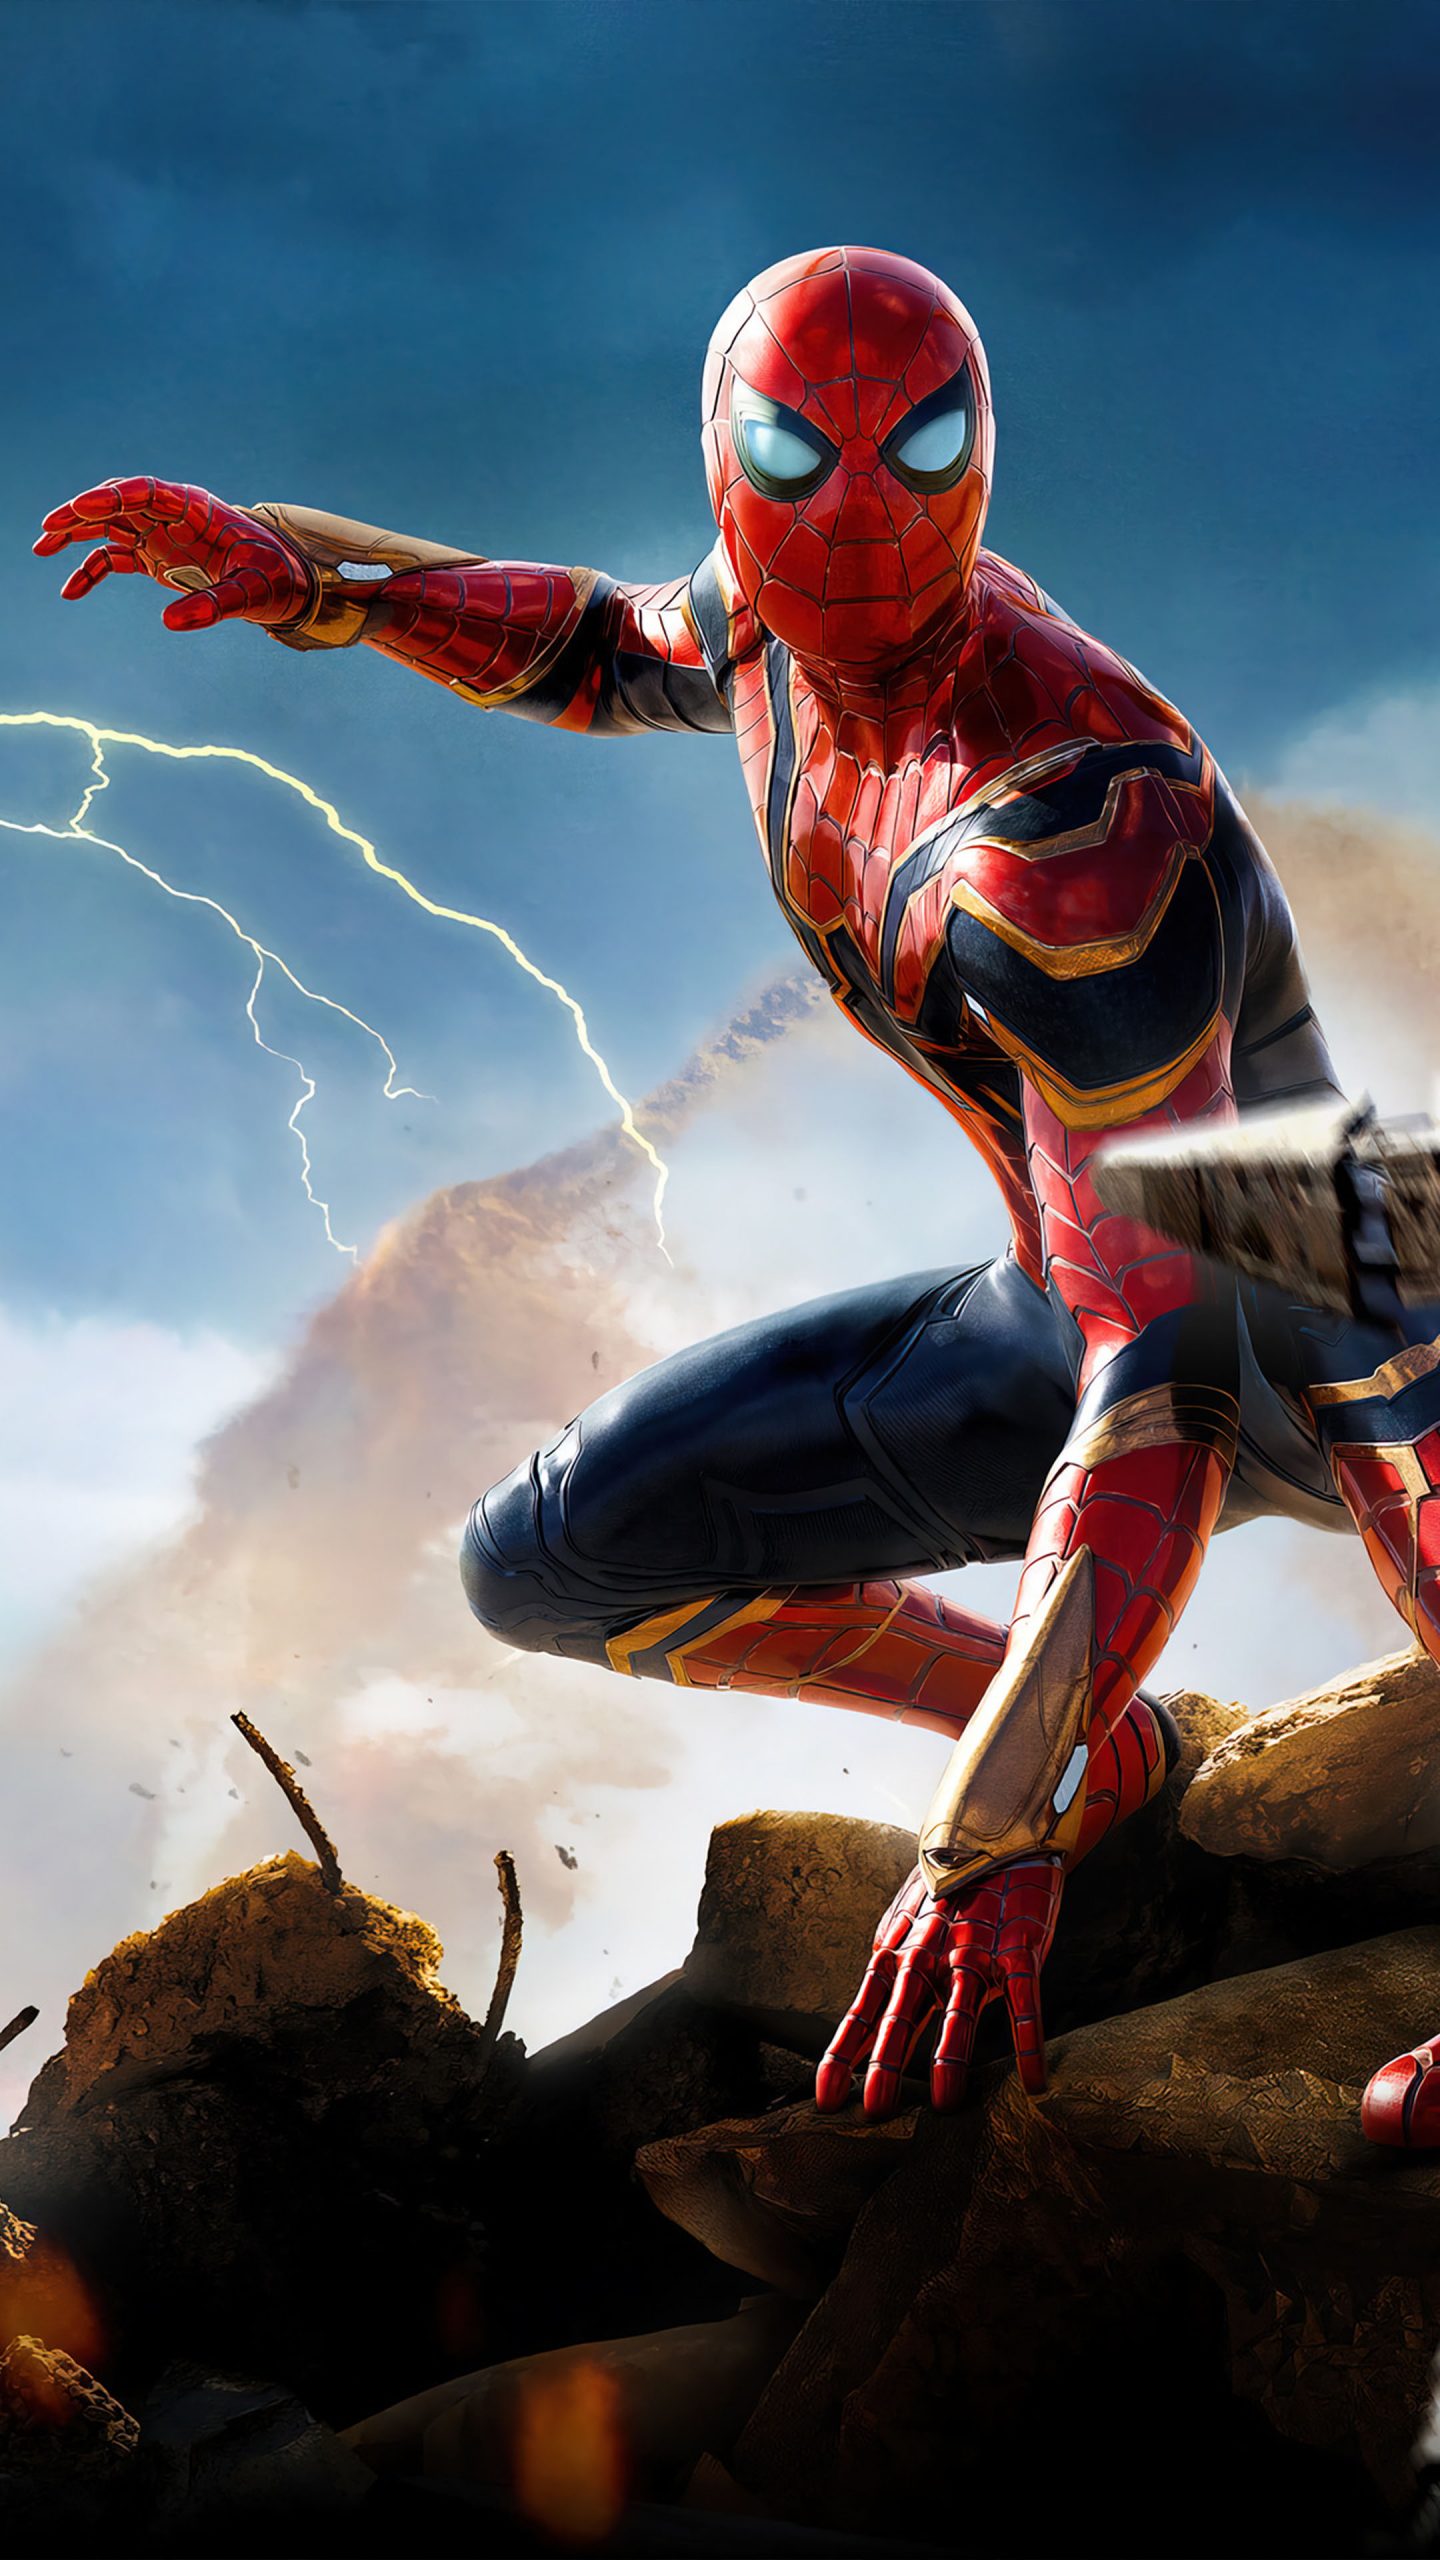 Spider-Man Wallpaper 4K: Download Spiderman Wallpapers for Mobile & PC